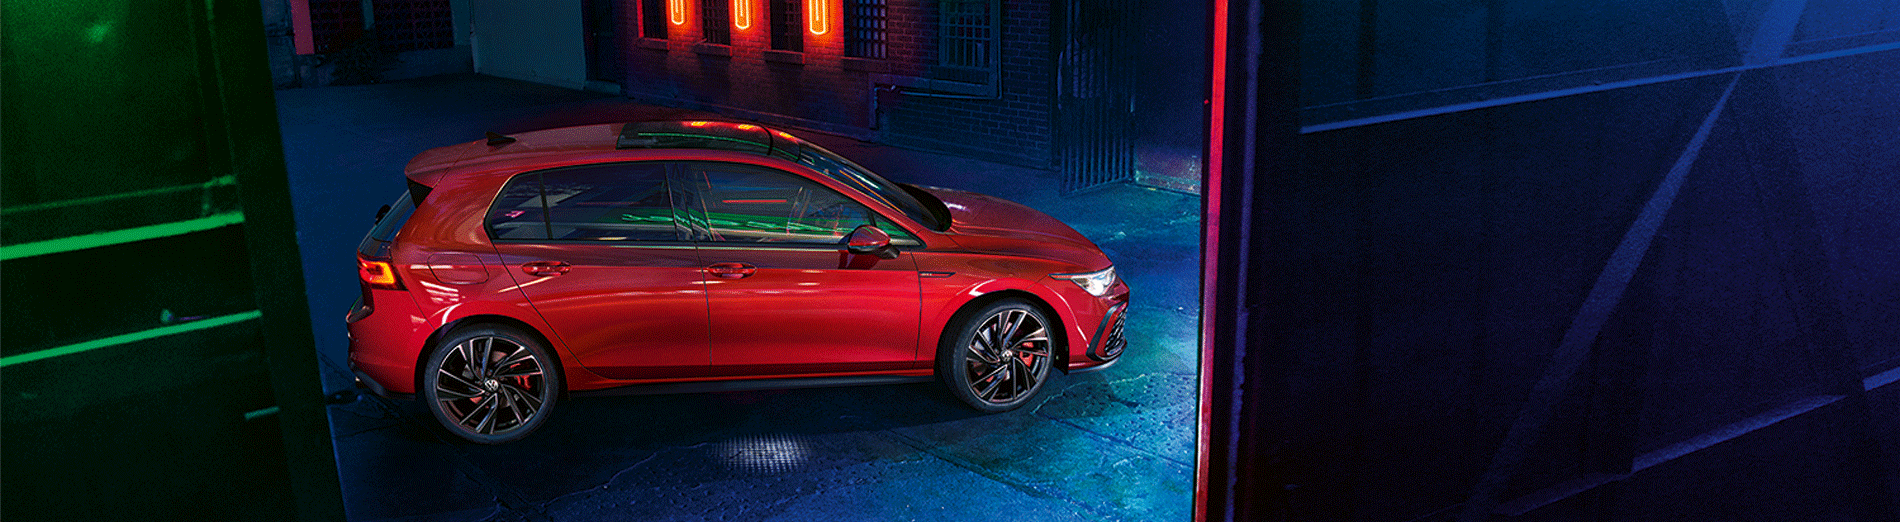 Golf 8 GTI wins award for 'Best All-Rounder Car'!